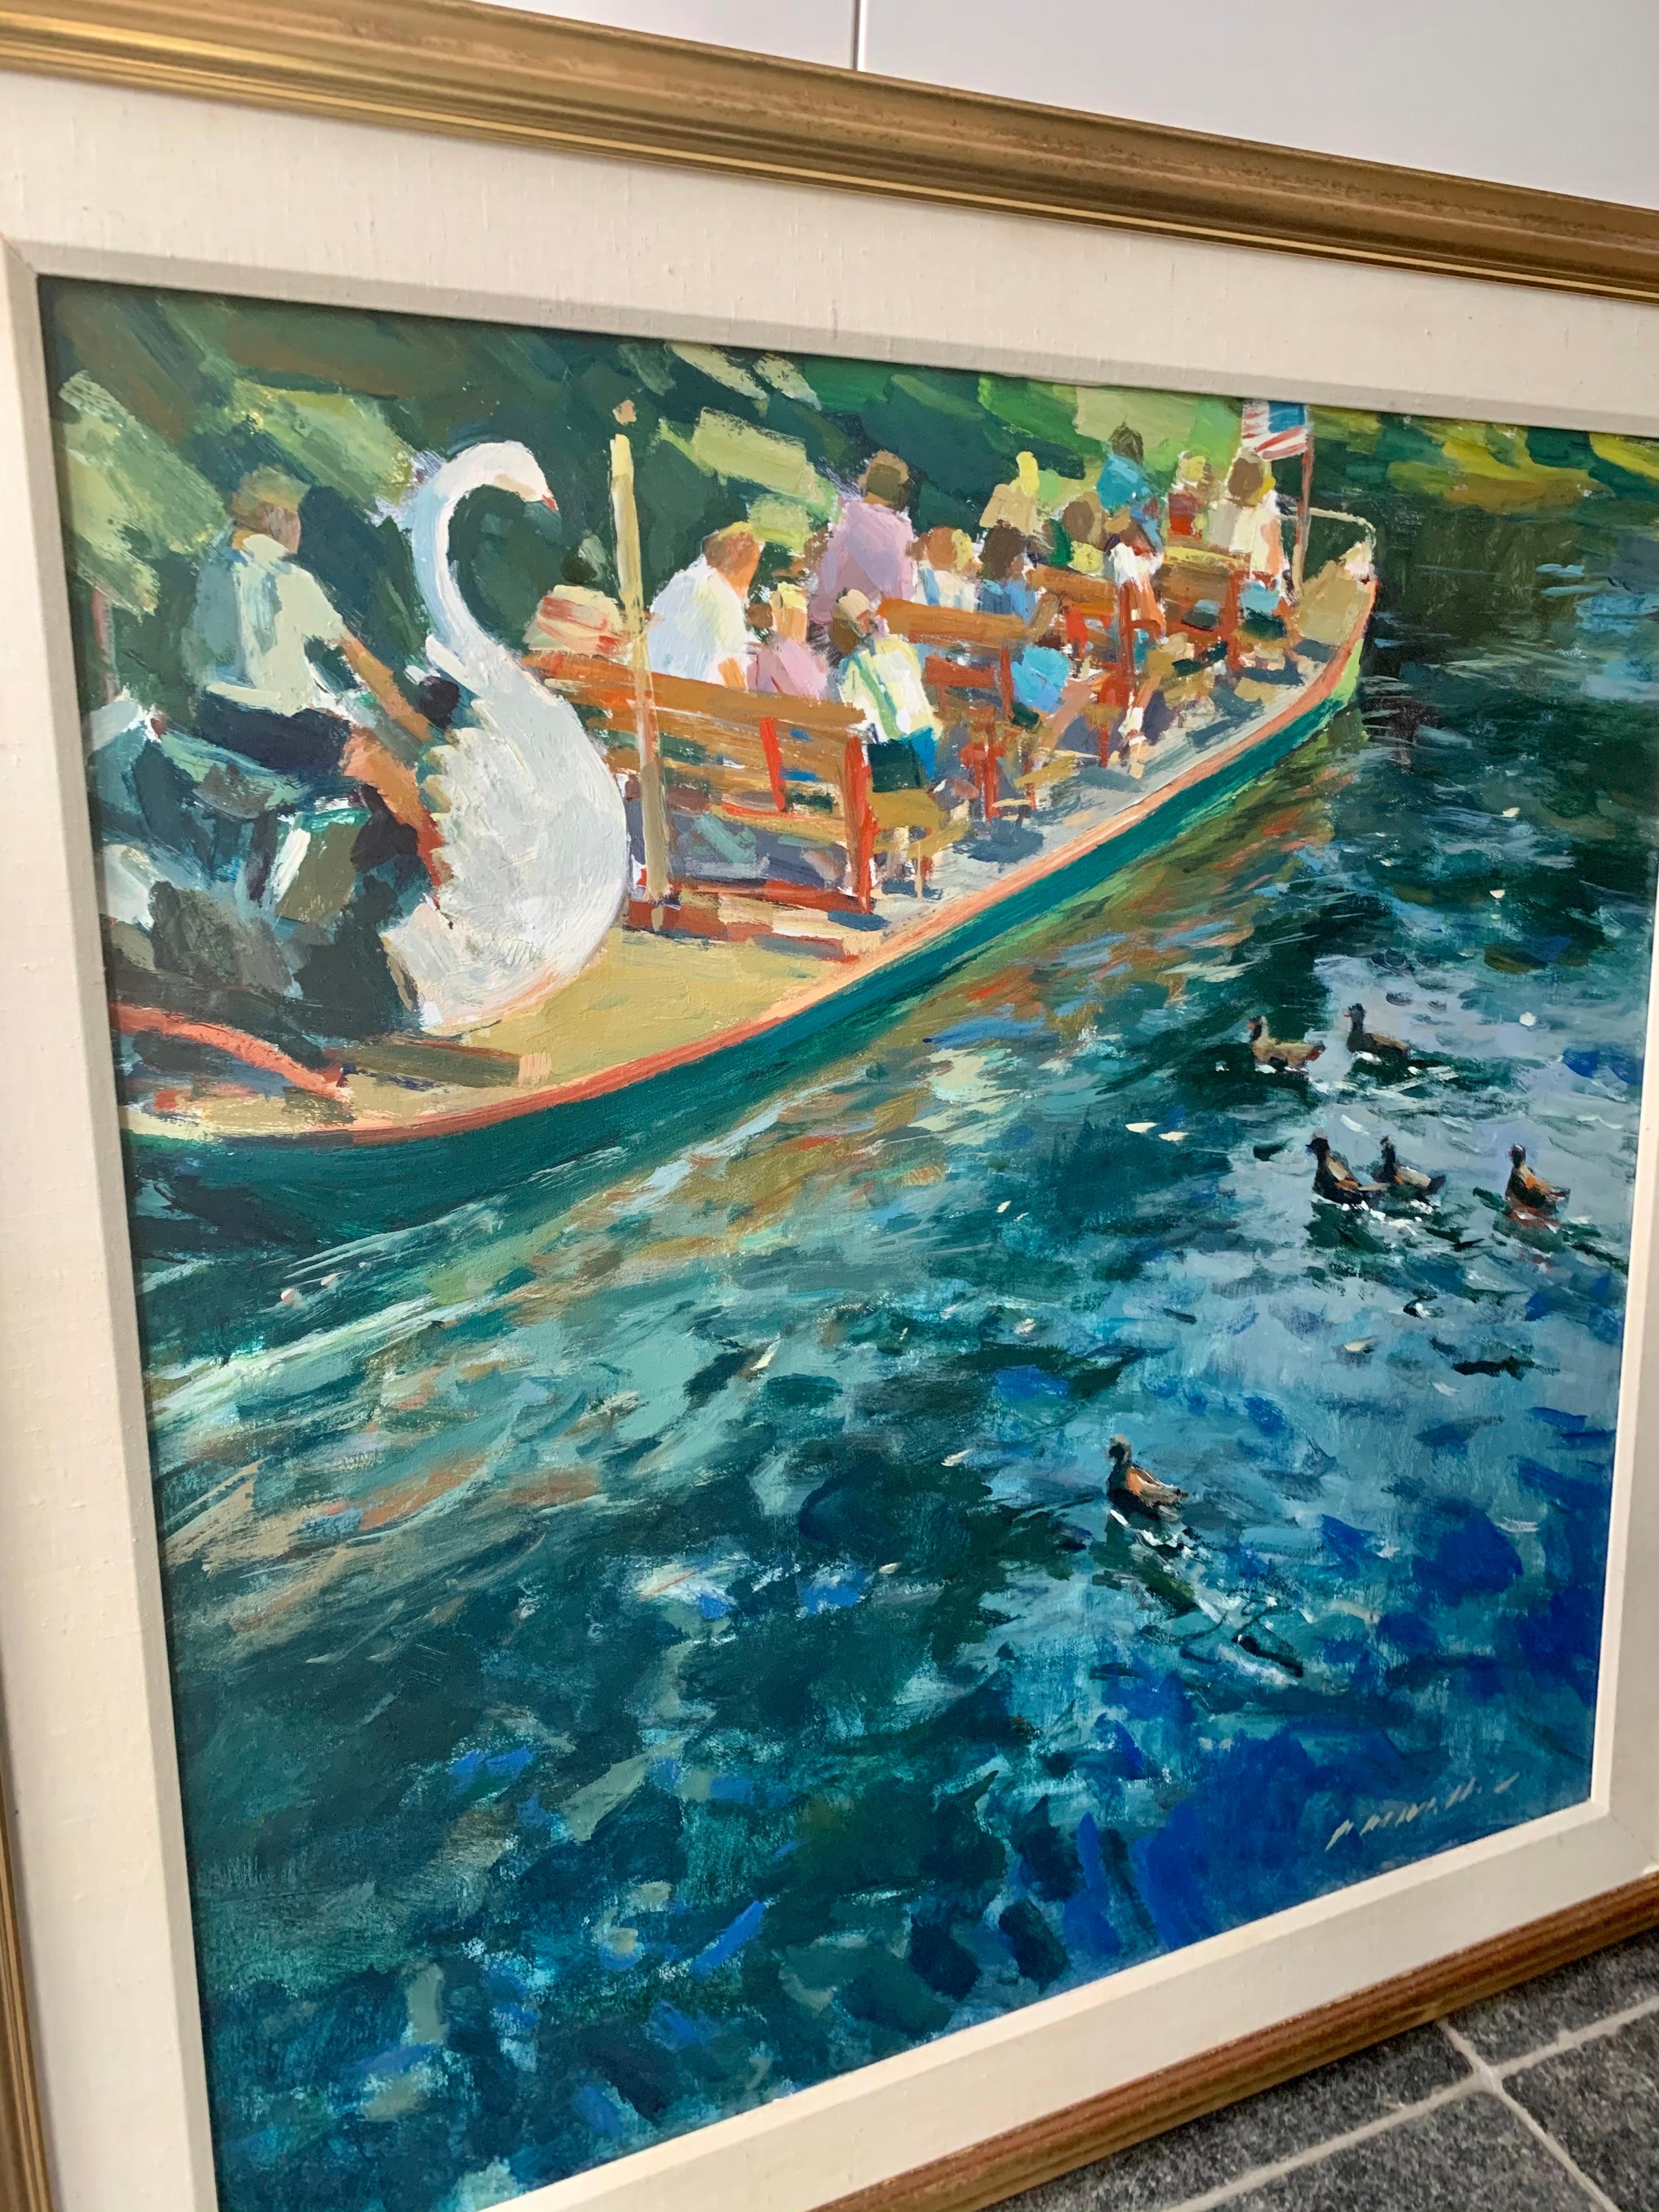 Very large and colourful painting depicting a swan boat in the Boston Public Garden. 

Charles Movalli (1945-2016) was a winner of numerous awards and honors for his painting, Movalli belonged to the Salmagundi Club (Gold Medal), the North Shore